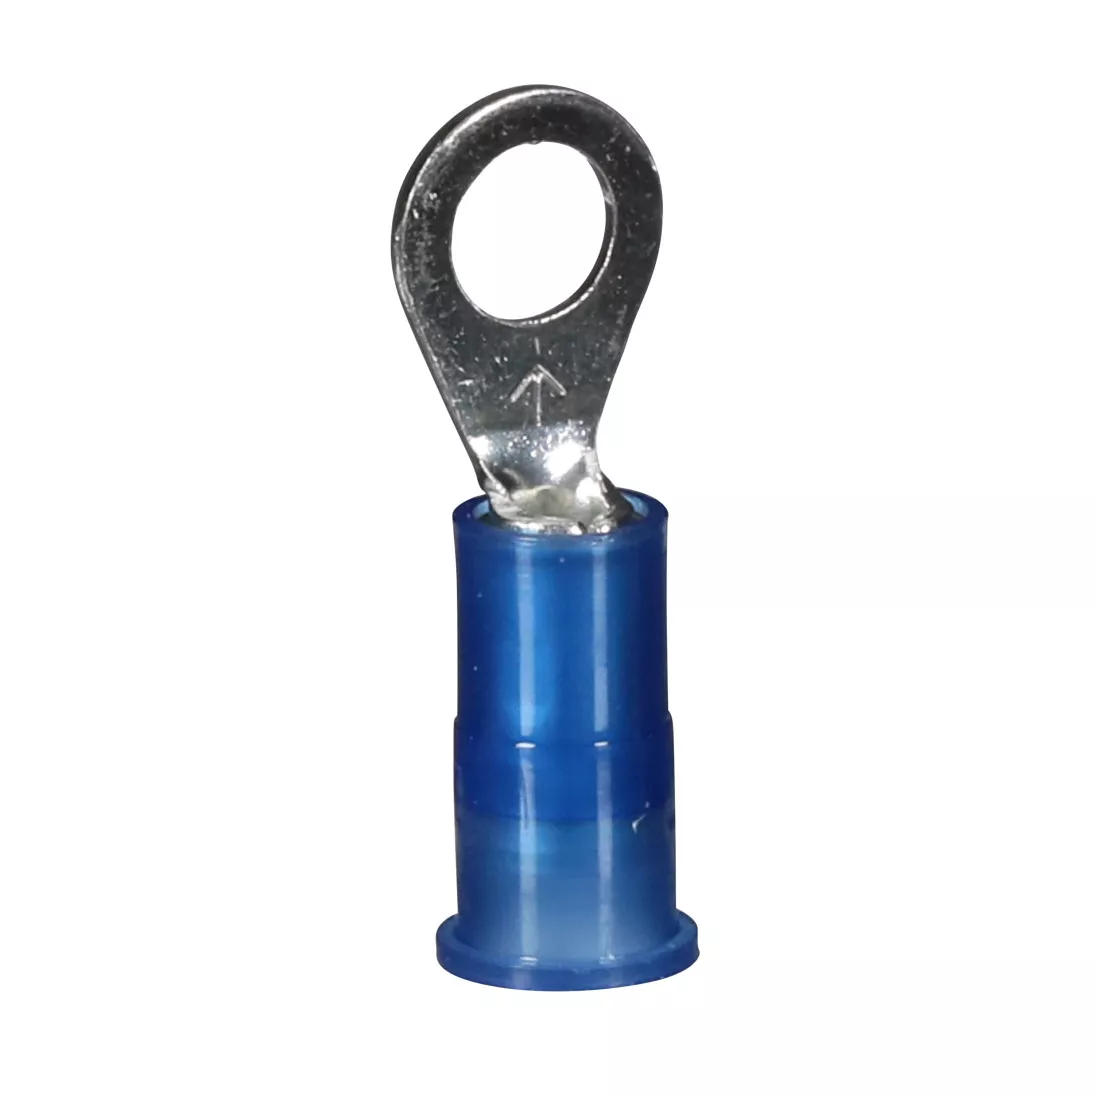 3M™ Scotchlok™ Ring Nylon Insulated, 100/bottle, MNG14-10RX,
standard-style ring tongue fits around the stud, 500/Case